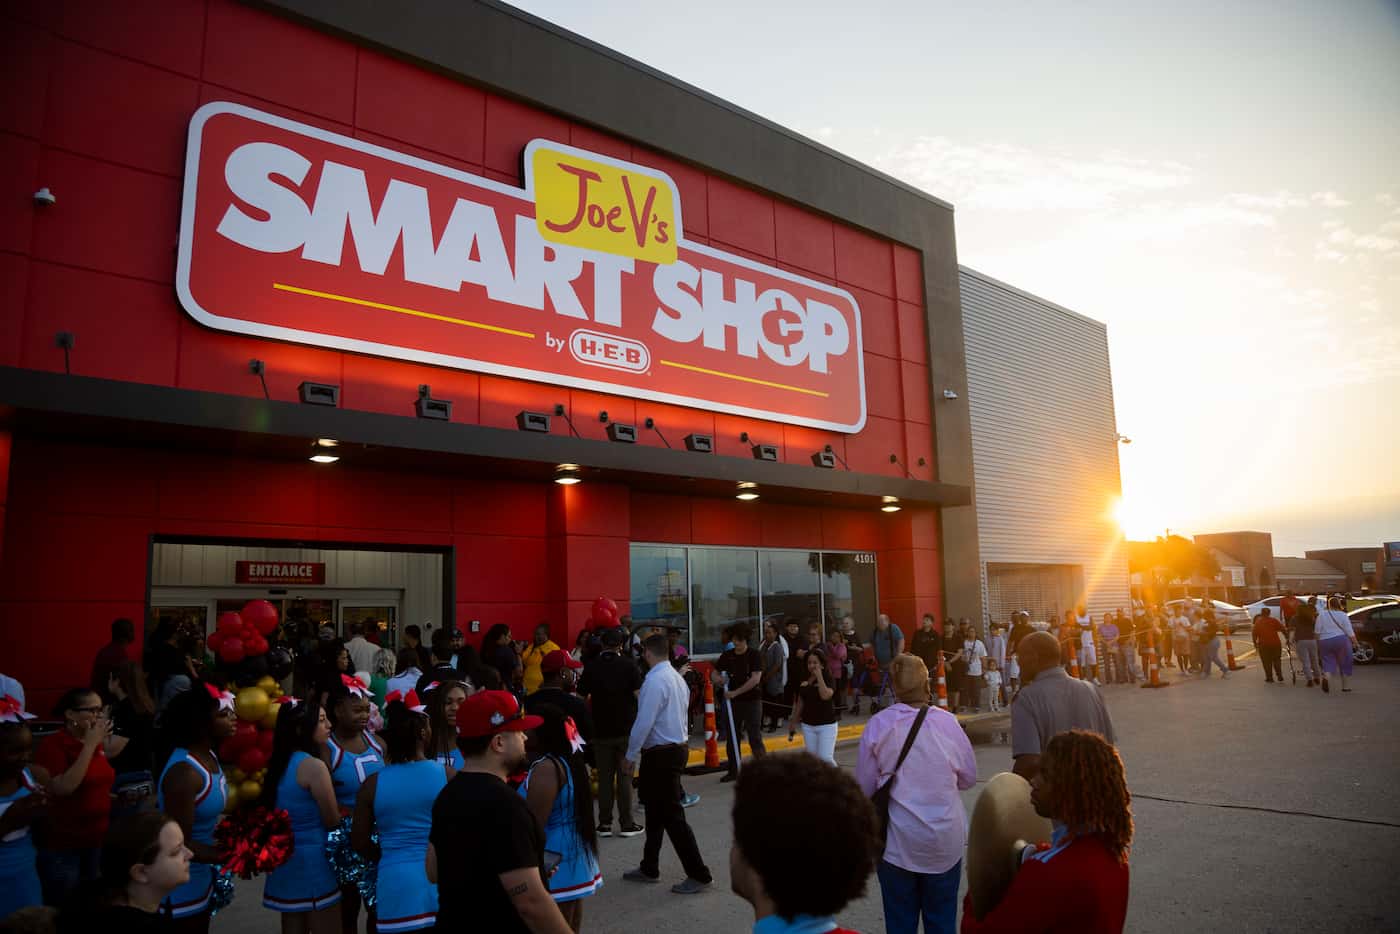 People wait outside before the grand opening of Joe V's Smart Shop on Wednesday, June 12,...